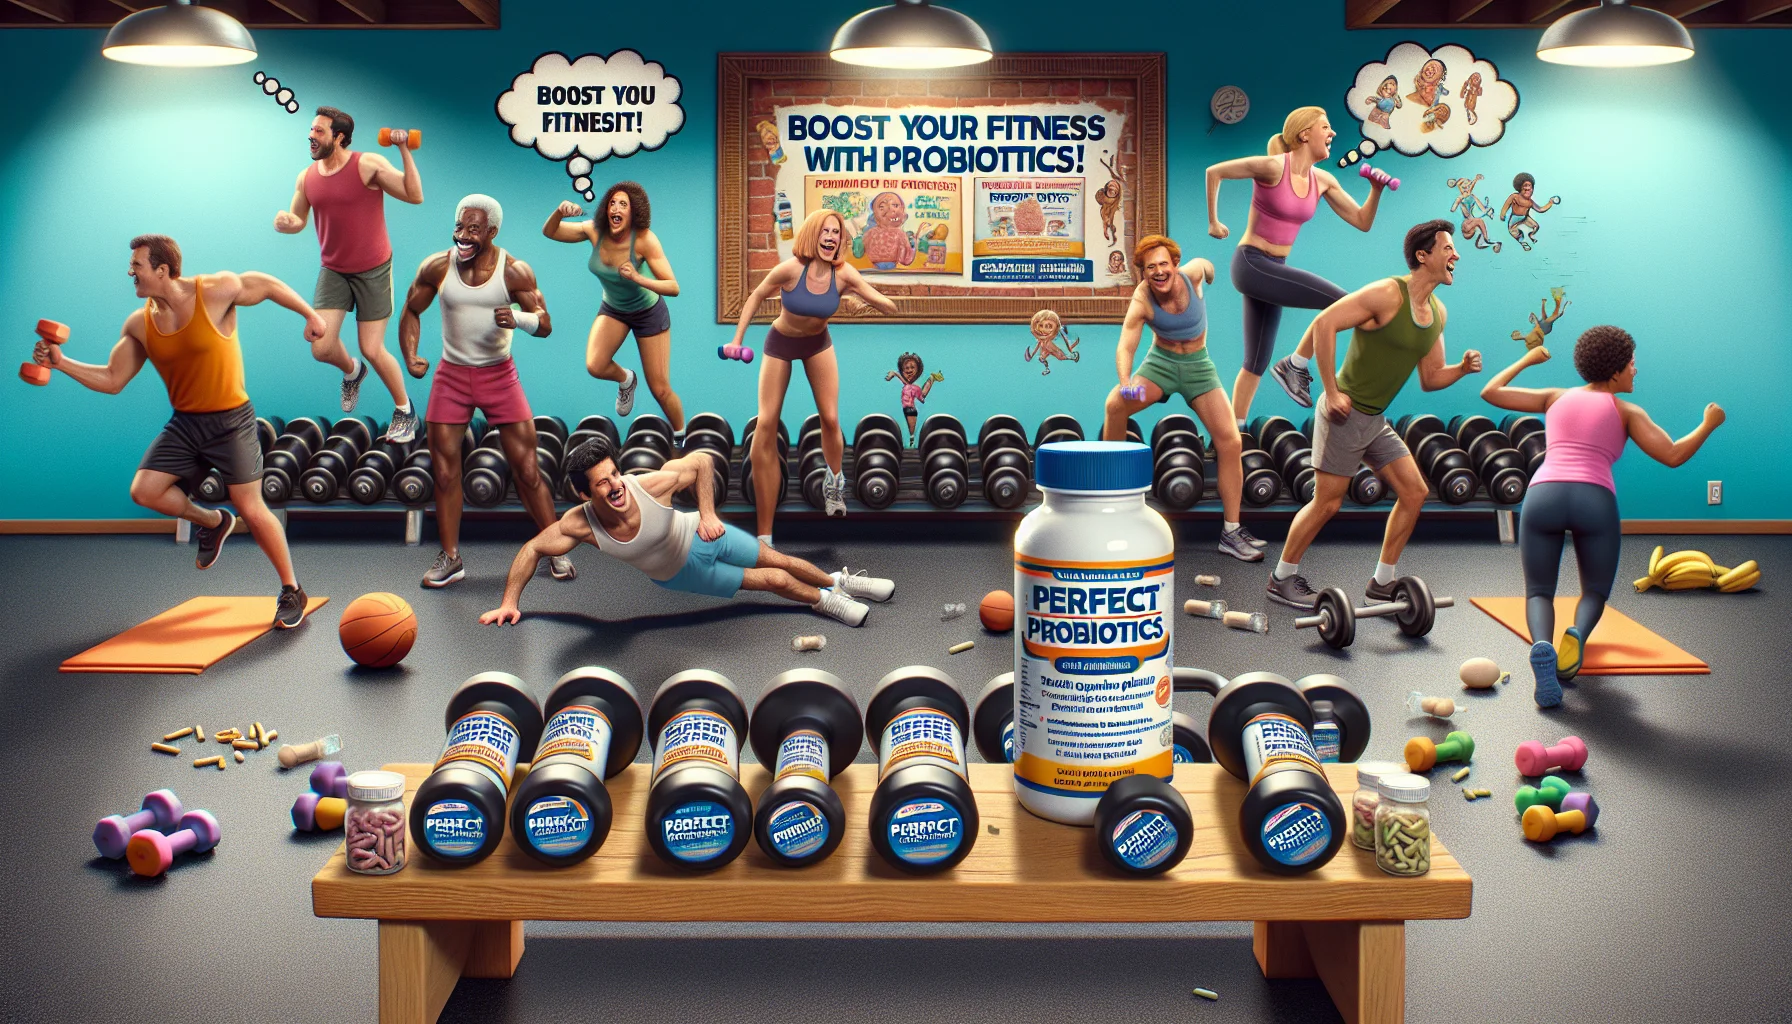 Create a humorous, realistic image of a gym setting where there are several bottles of a generic probiotic supplement lined up as makeshift dumbbells. The bottles are labeled 'Perfect Probiotics'. In the background, there are diverse individuals of different genders and descents energetically engaging in various forms of exercise such as running, cycling, doing push-ups, etc. They are laughing and seem to be thoroughly enjoying their workout session. There are thought bubbles over a few individuals showing their curiosity and interest in the probiotic dumbbells. Also, include a billboard in the corner that reads: 'Boost your Fitness with Probiotics!'